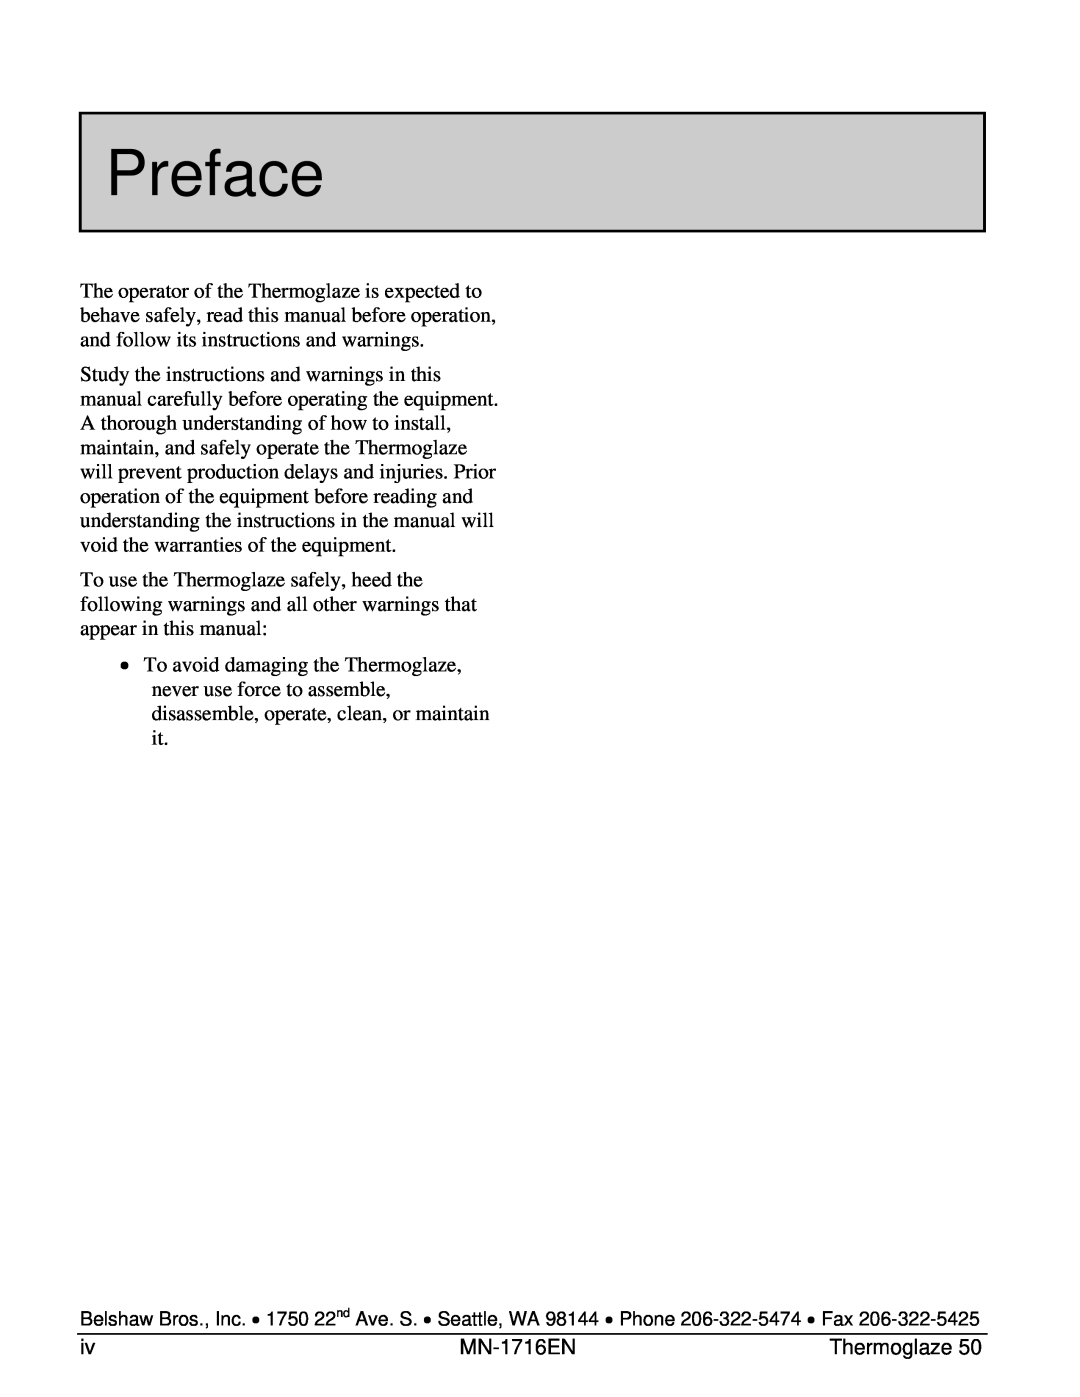 Belshaw Brothers TG 50 manual Preface 